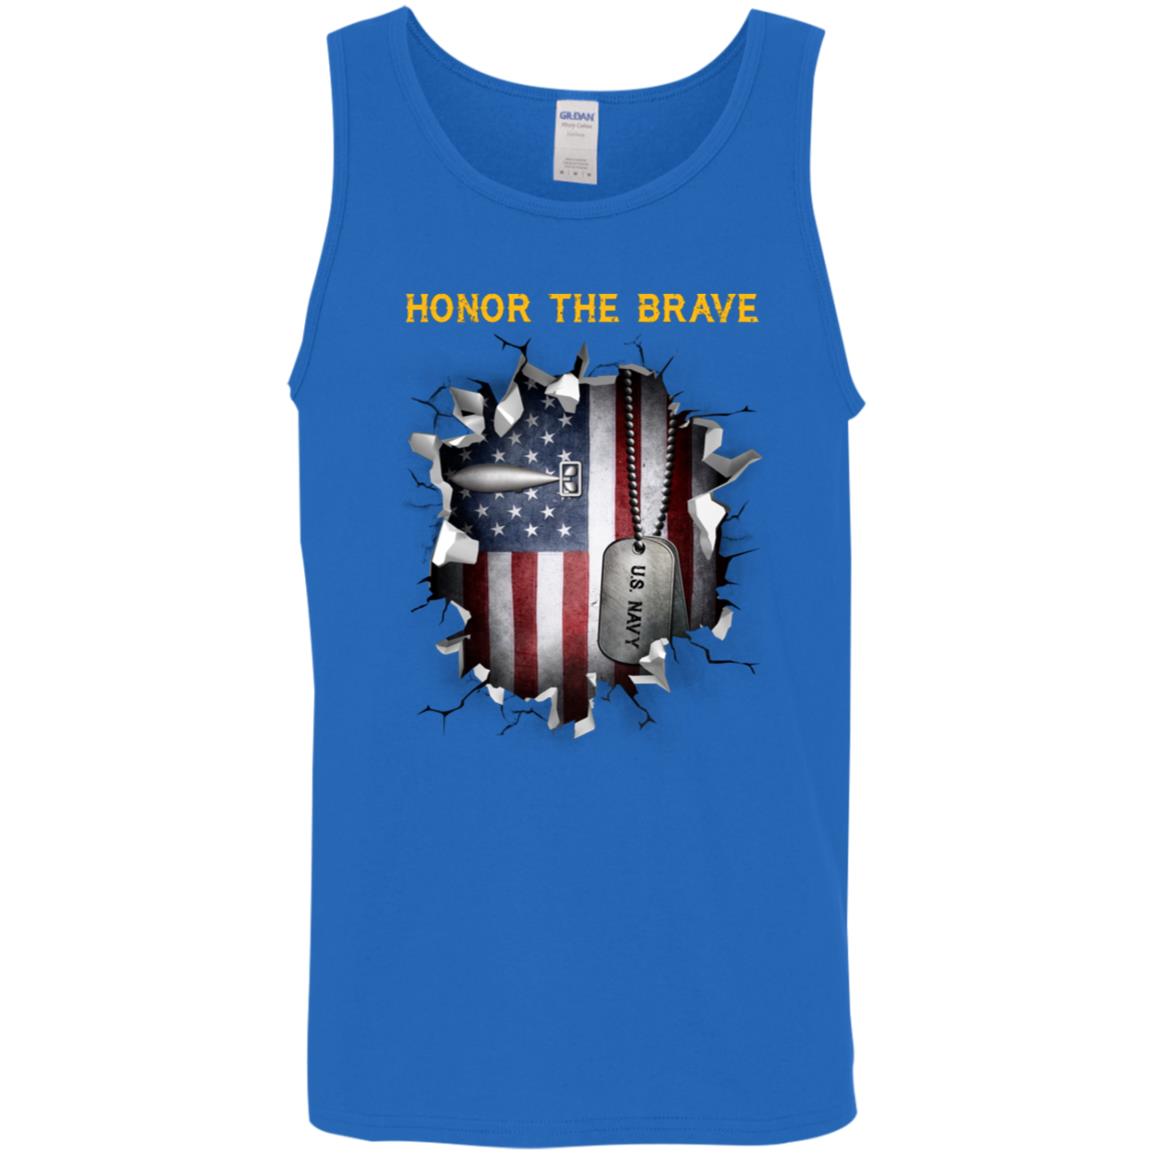 U.S Navy Torpedoman_s mate Navy TM - Honor The Brave Front Shirt